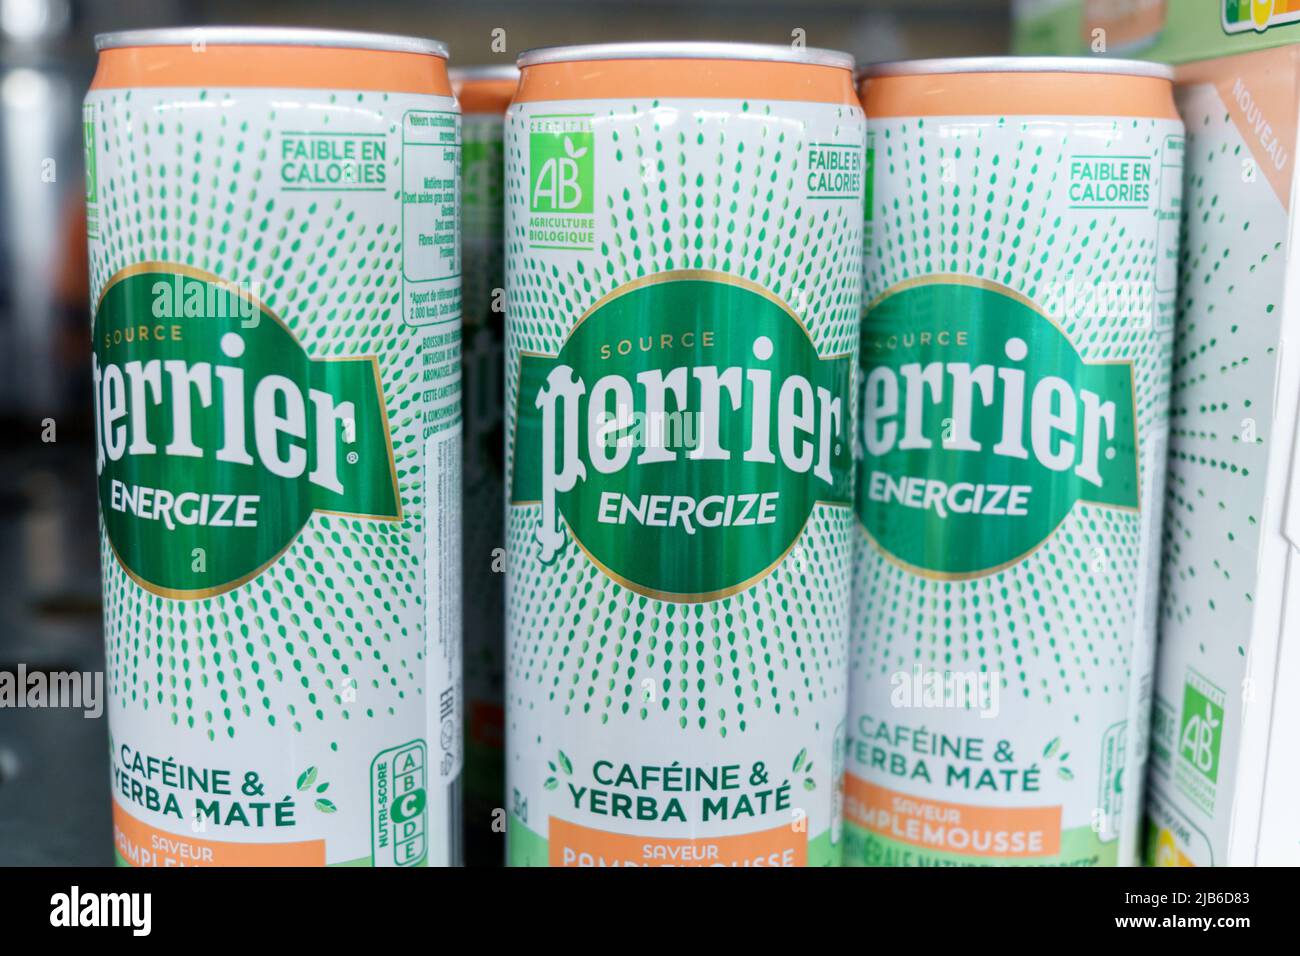 Tyumen, Russia-May 11, 2022: Mineral water bottles Perrier energize cofeine yerba mate. French brand of premium mineral water. Selling in the hypermar Stock Photo